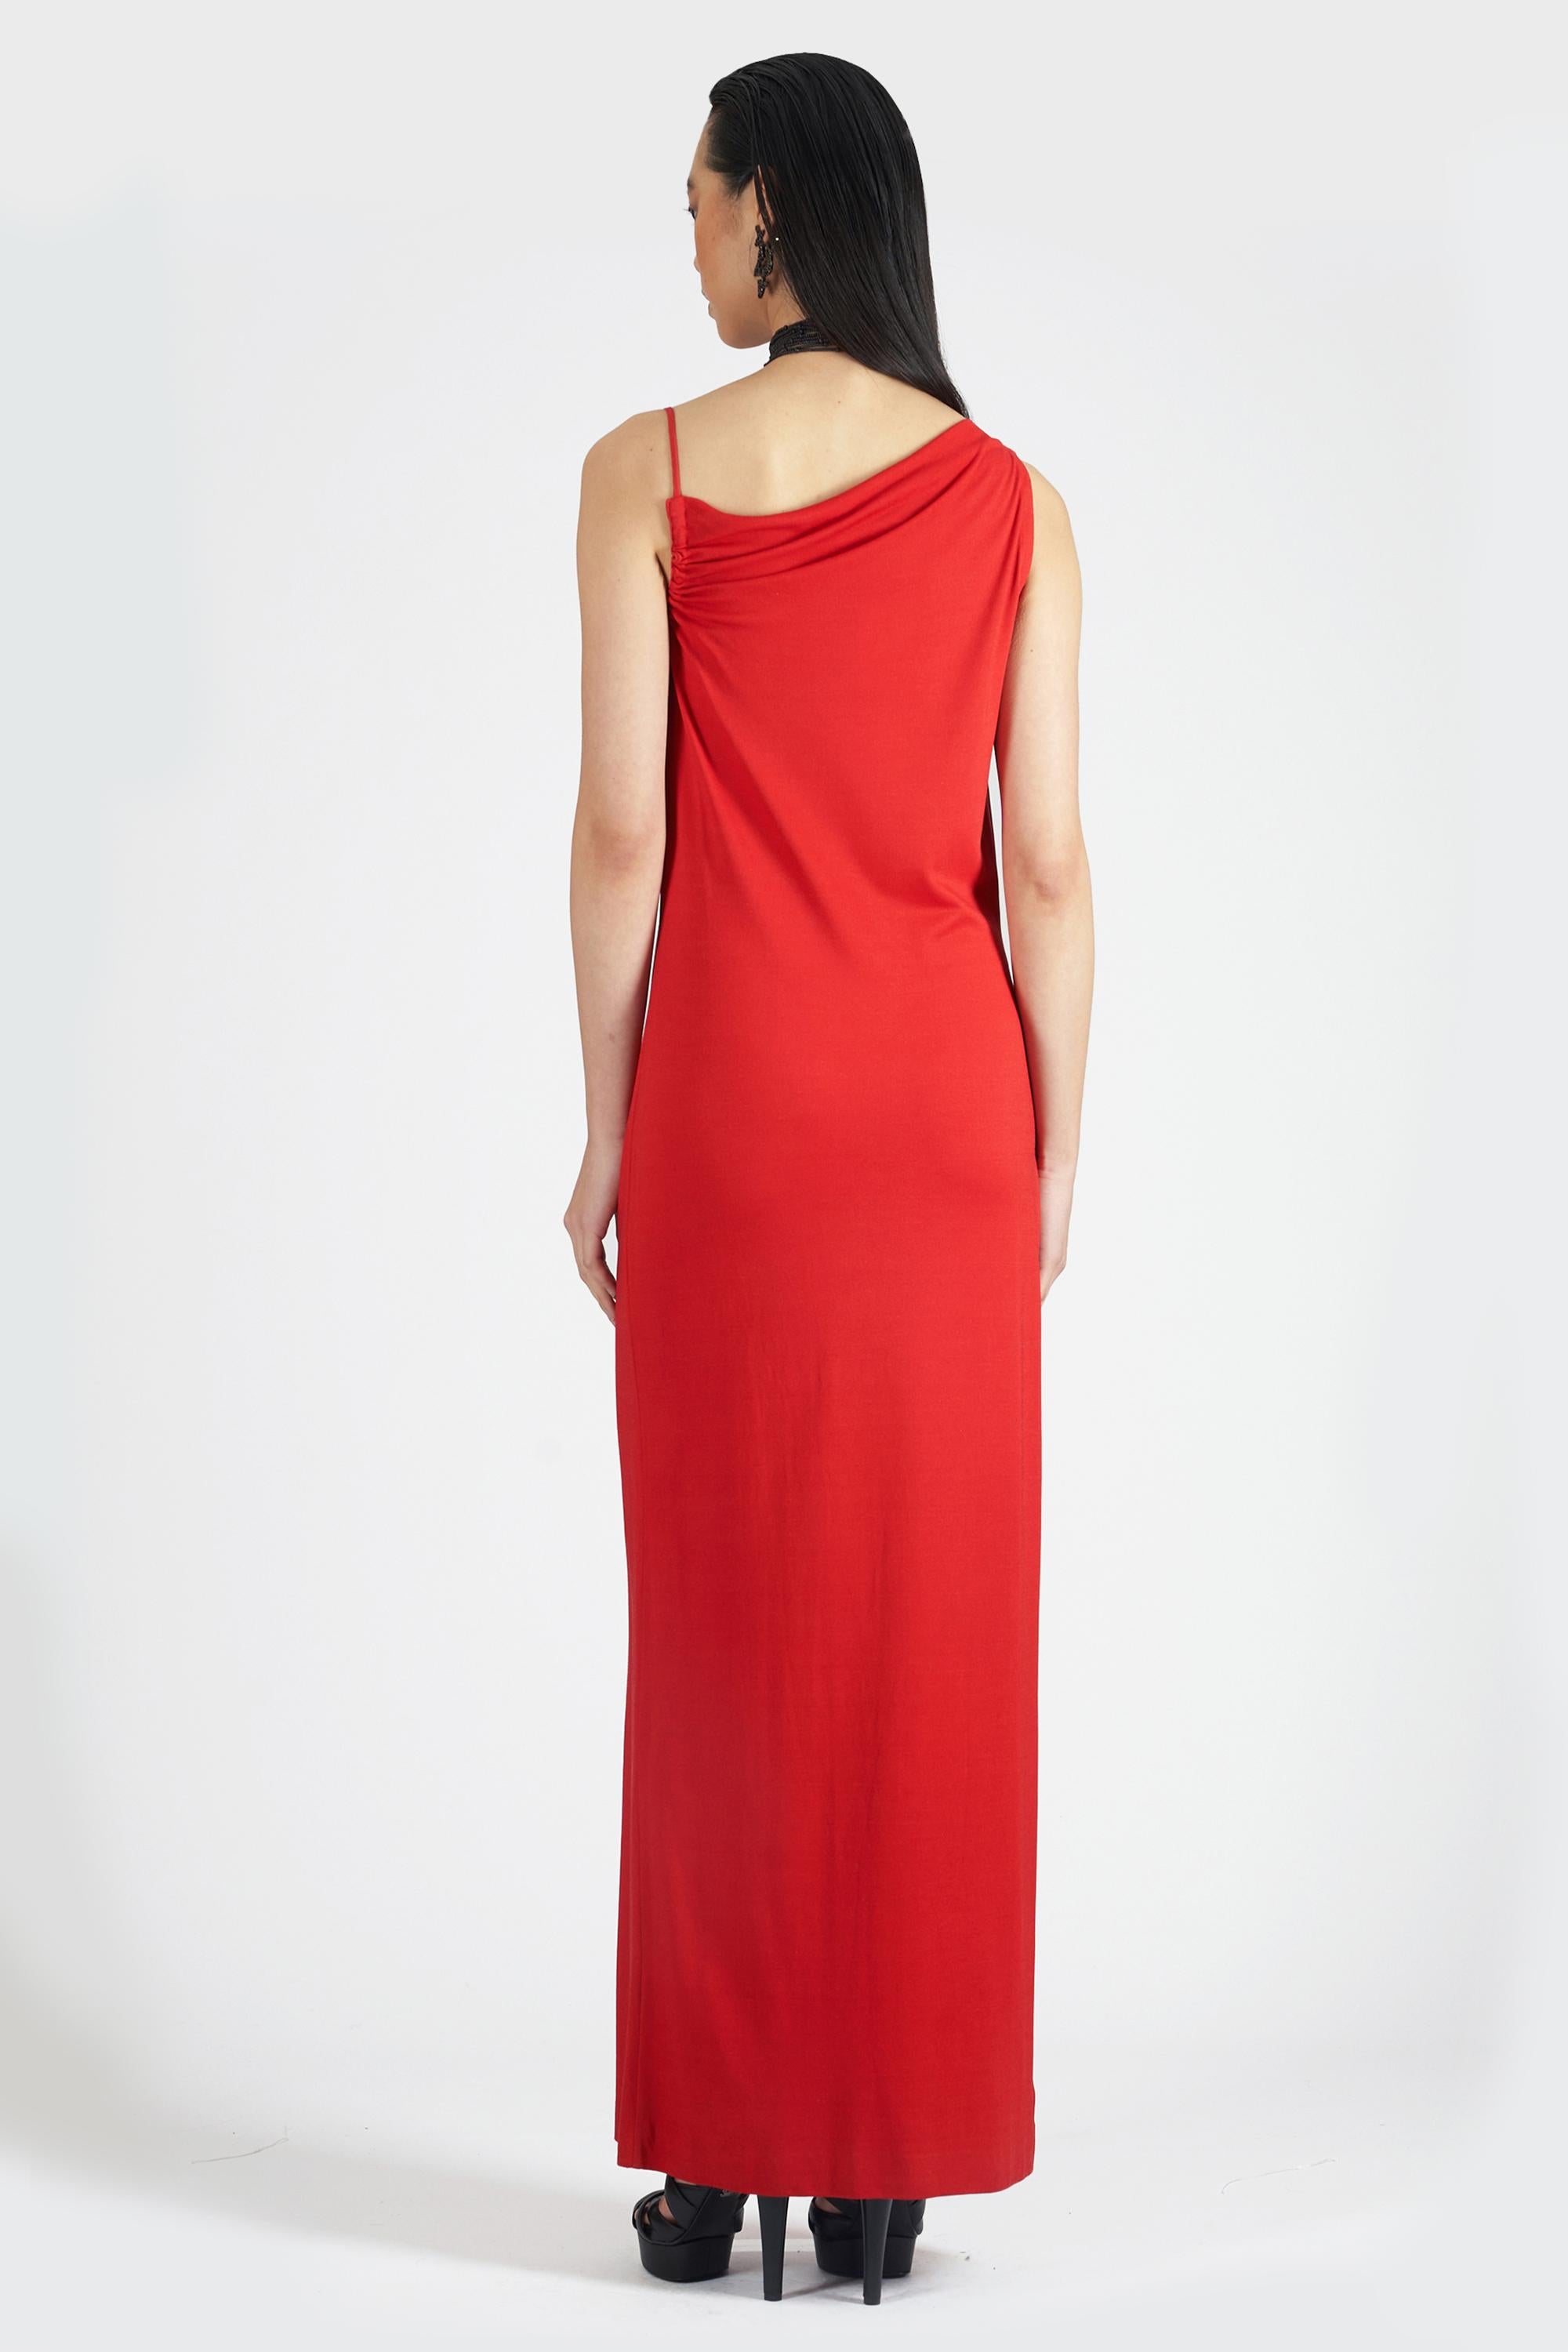 We are excited to present this Versus Versace early 2000’s red asymmetrical neckline dress. Features an asymmetrical neckline with ruched detail and maxi length. In excellent vintage condition. Authenticity guaranteed.

Label size: 44 IT
Modern